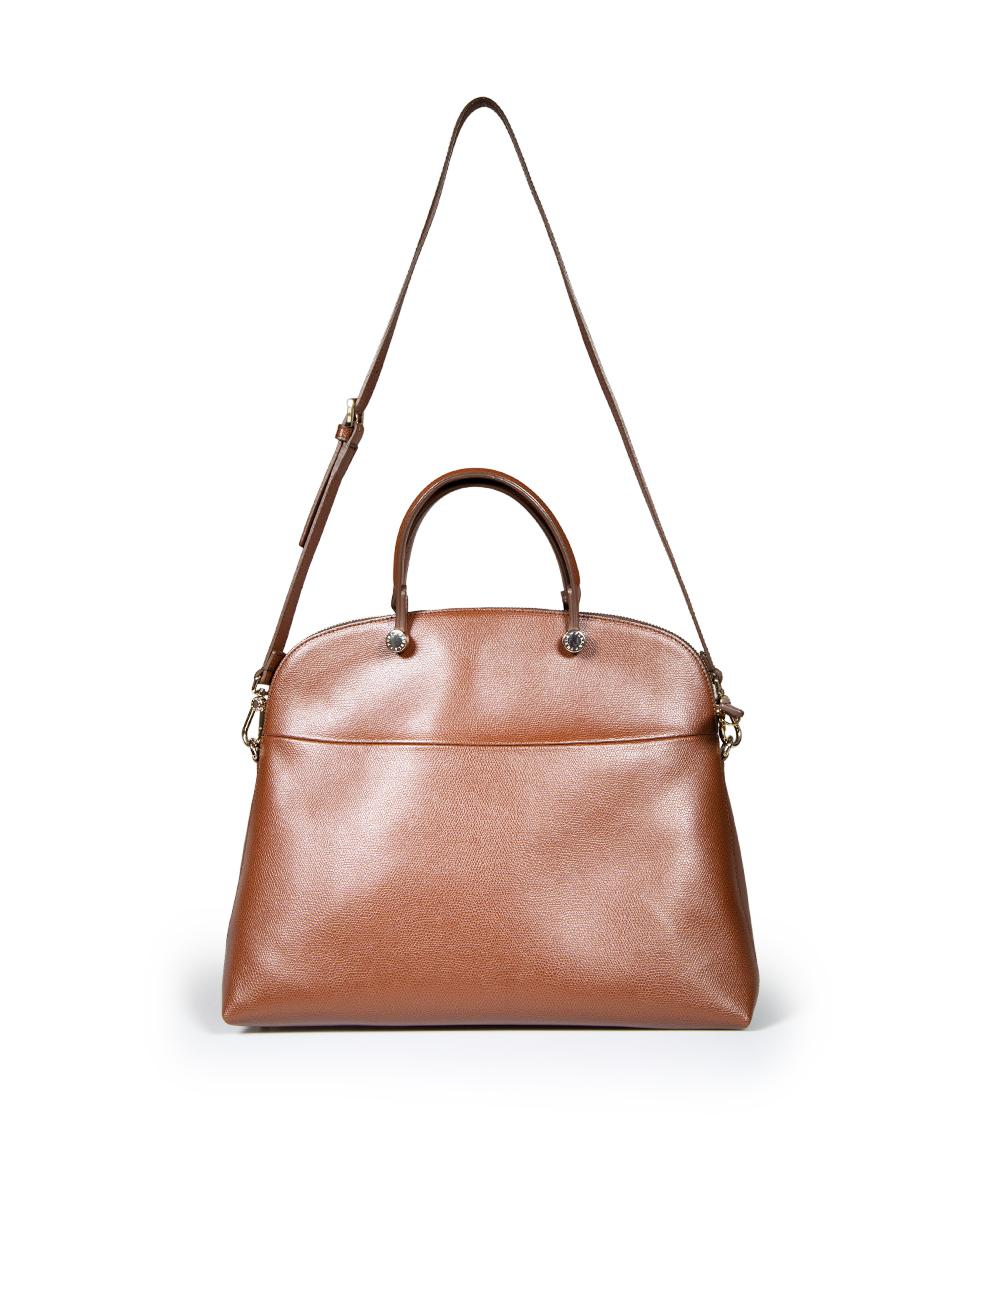 Furla Brown Leather My Piper Large Handbag In Good Condition For Sale In London, GB